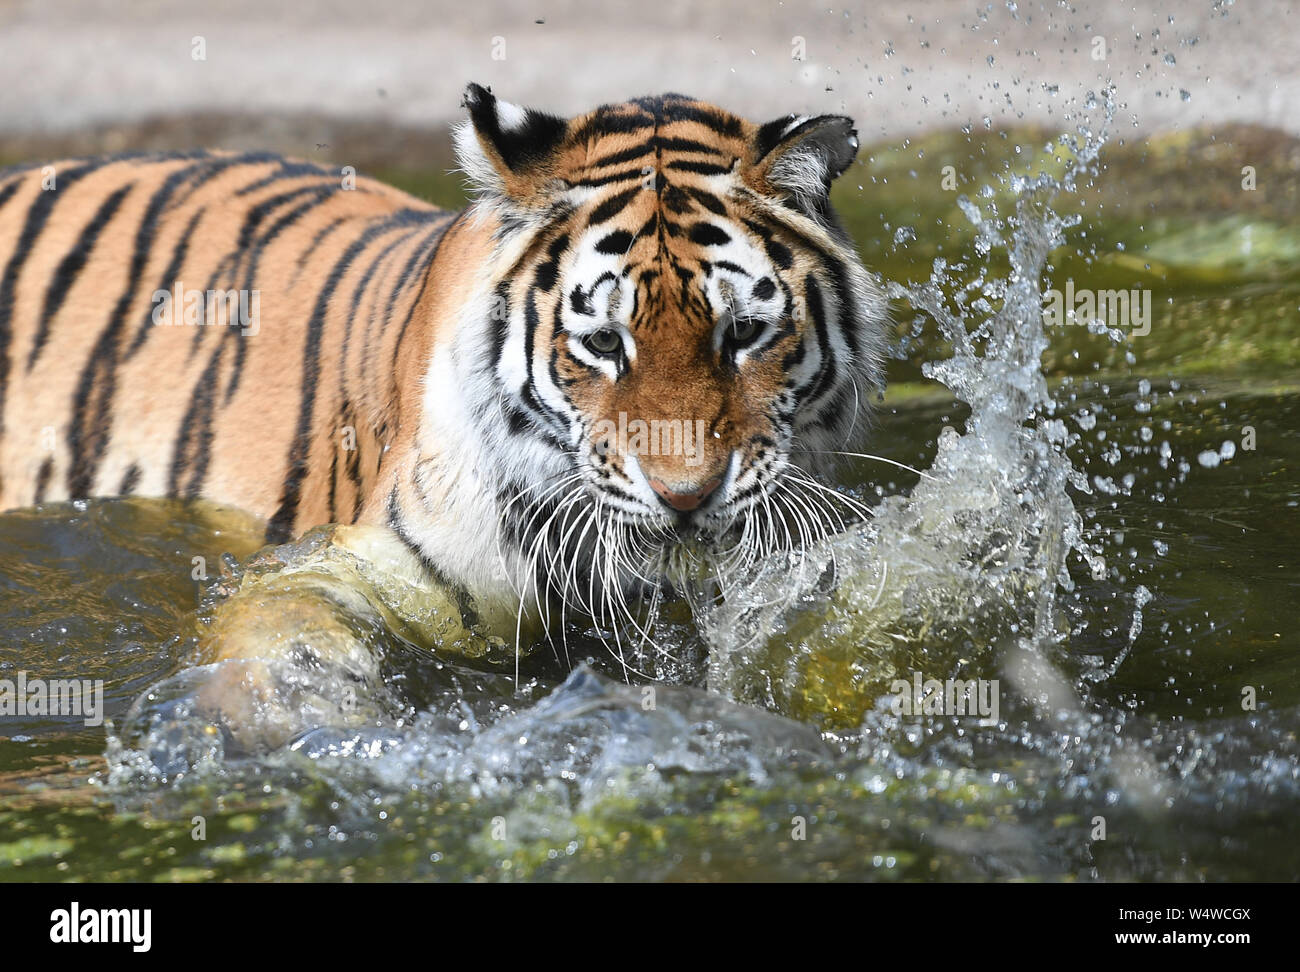 Amur tiger Minerva cools off in her pool at Woburn Safari Park in Bedfordshire, as the UK has surpassed the hottest July day on record, with 36.9 degrees celsius at Heathrow being recorded. Stock Photo